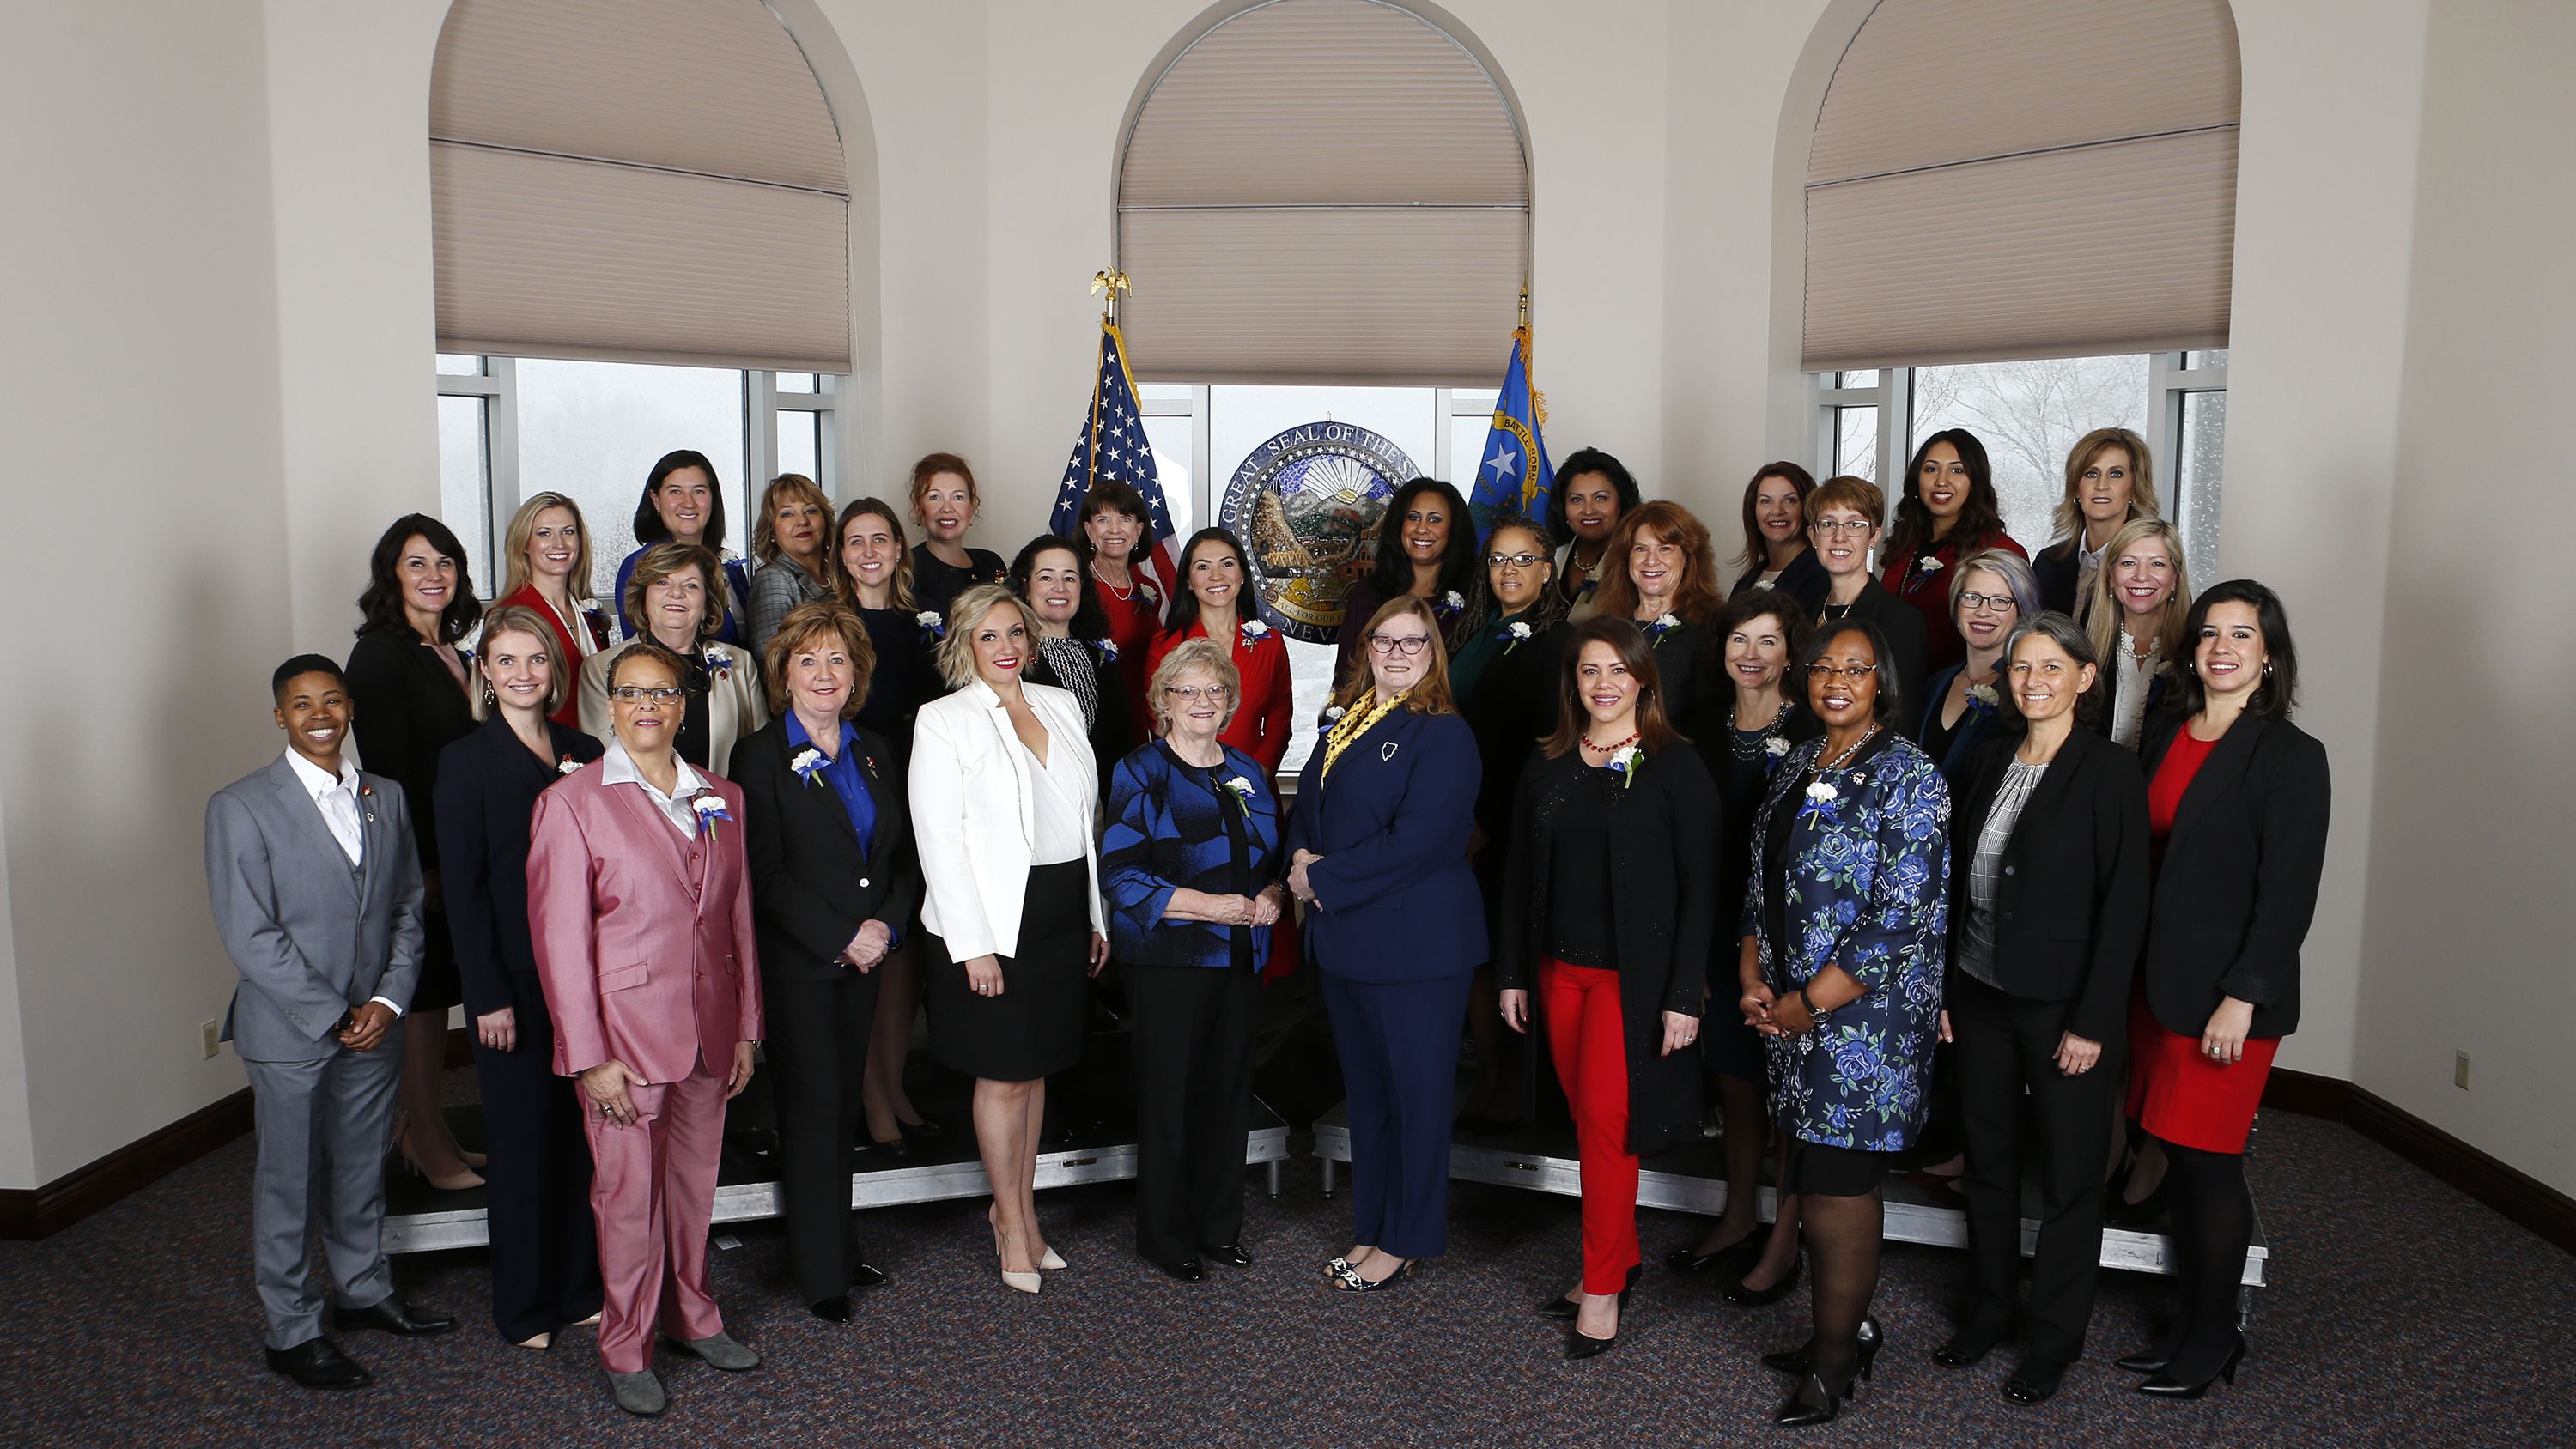 The 32 female members of the Nevada Legislature photographed in Carson City, Nevada, on February 4, 2019. They are the first female majority Legislature in the US. 